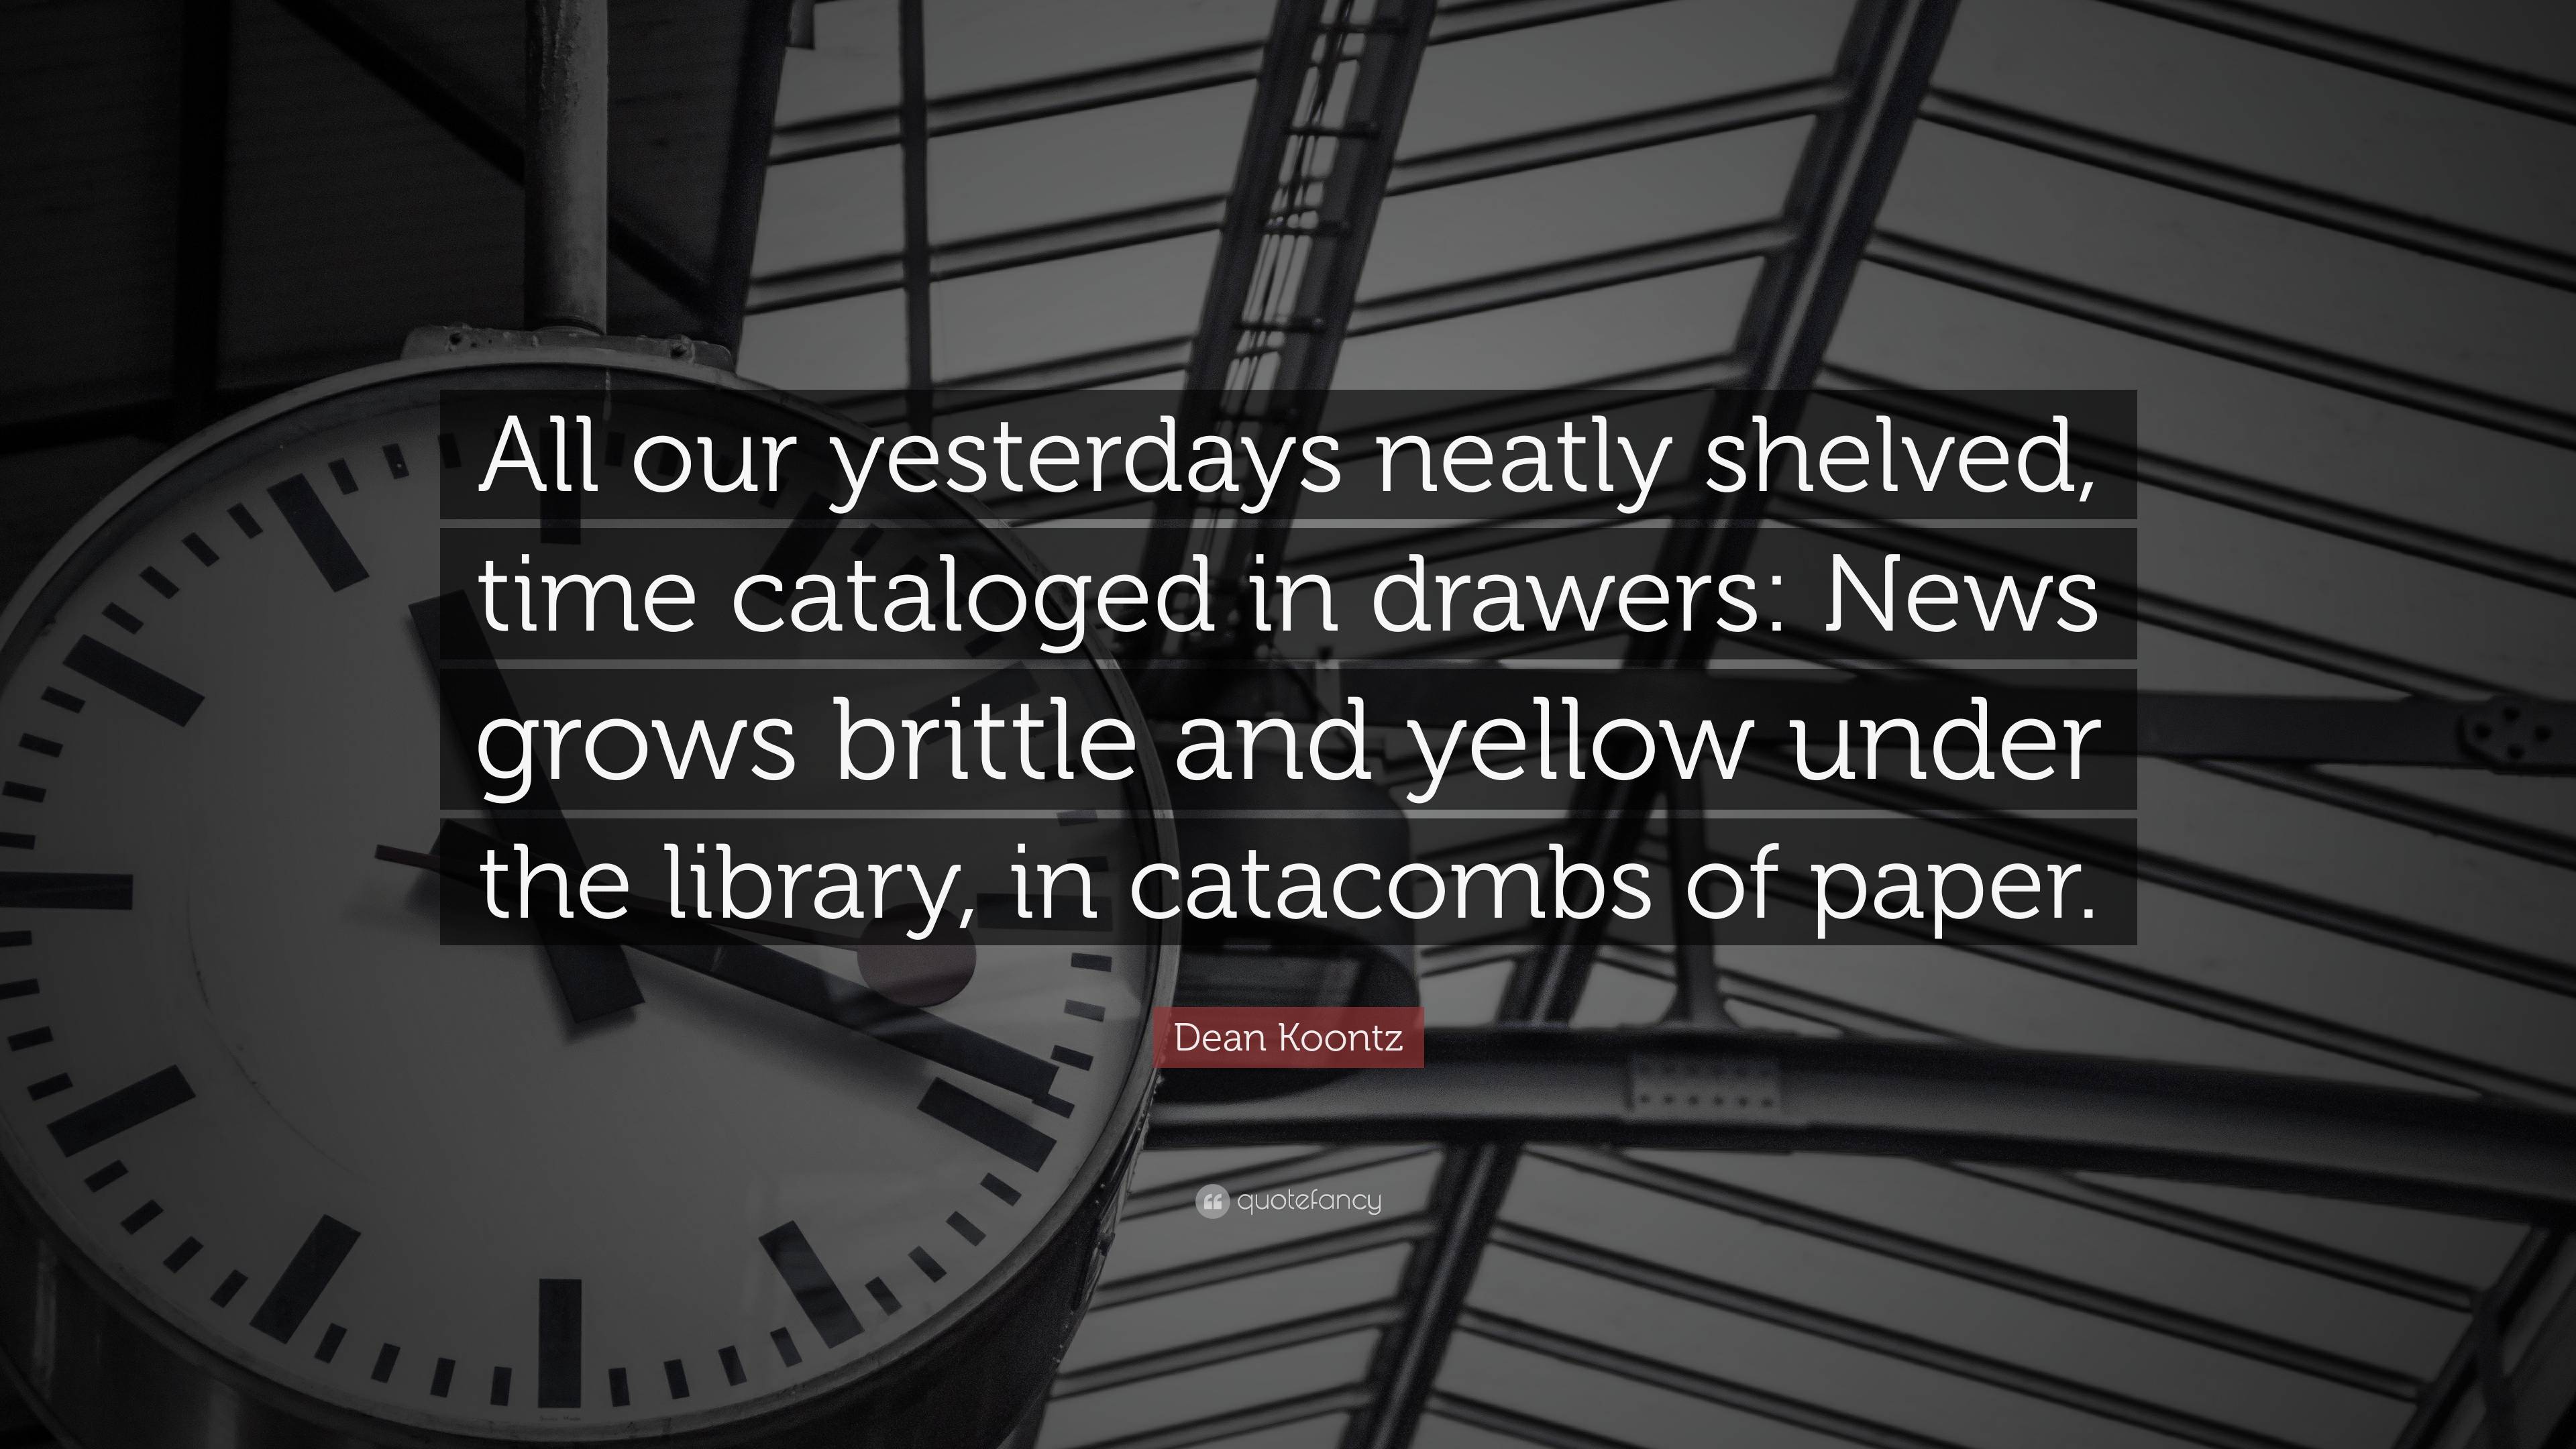 Dean Koontz Quote “All our yesterdays neatly shelved, time cataloged